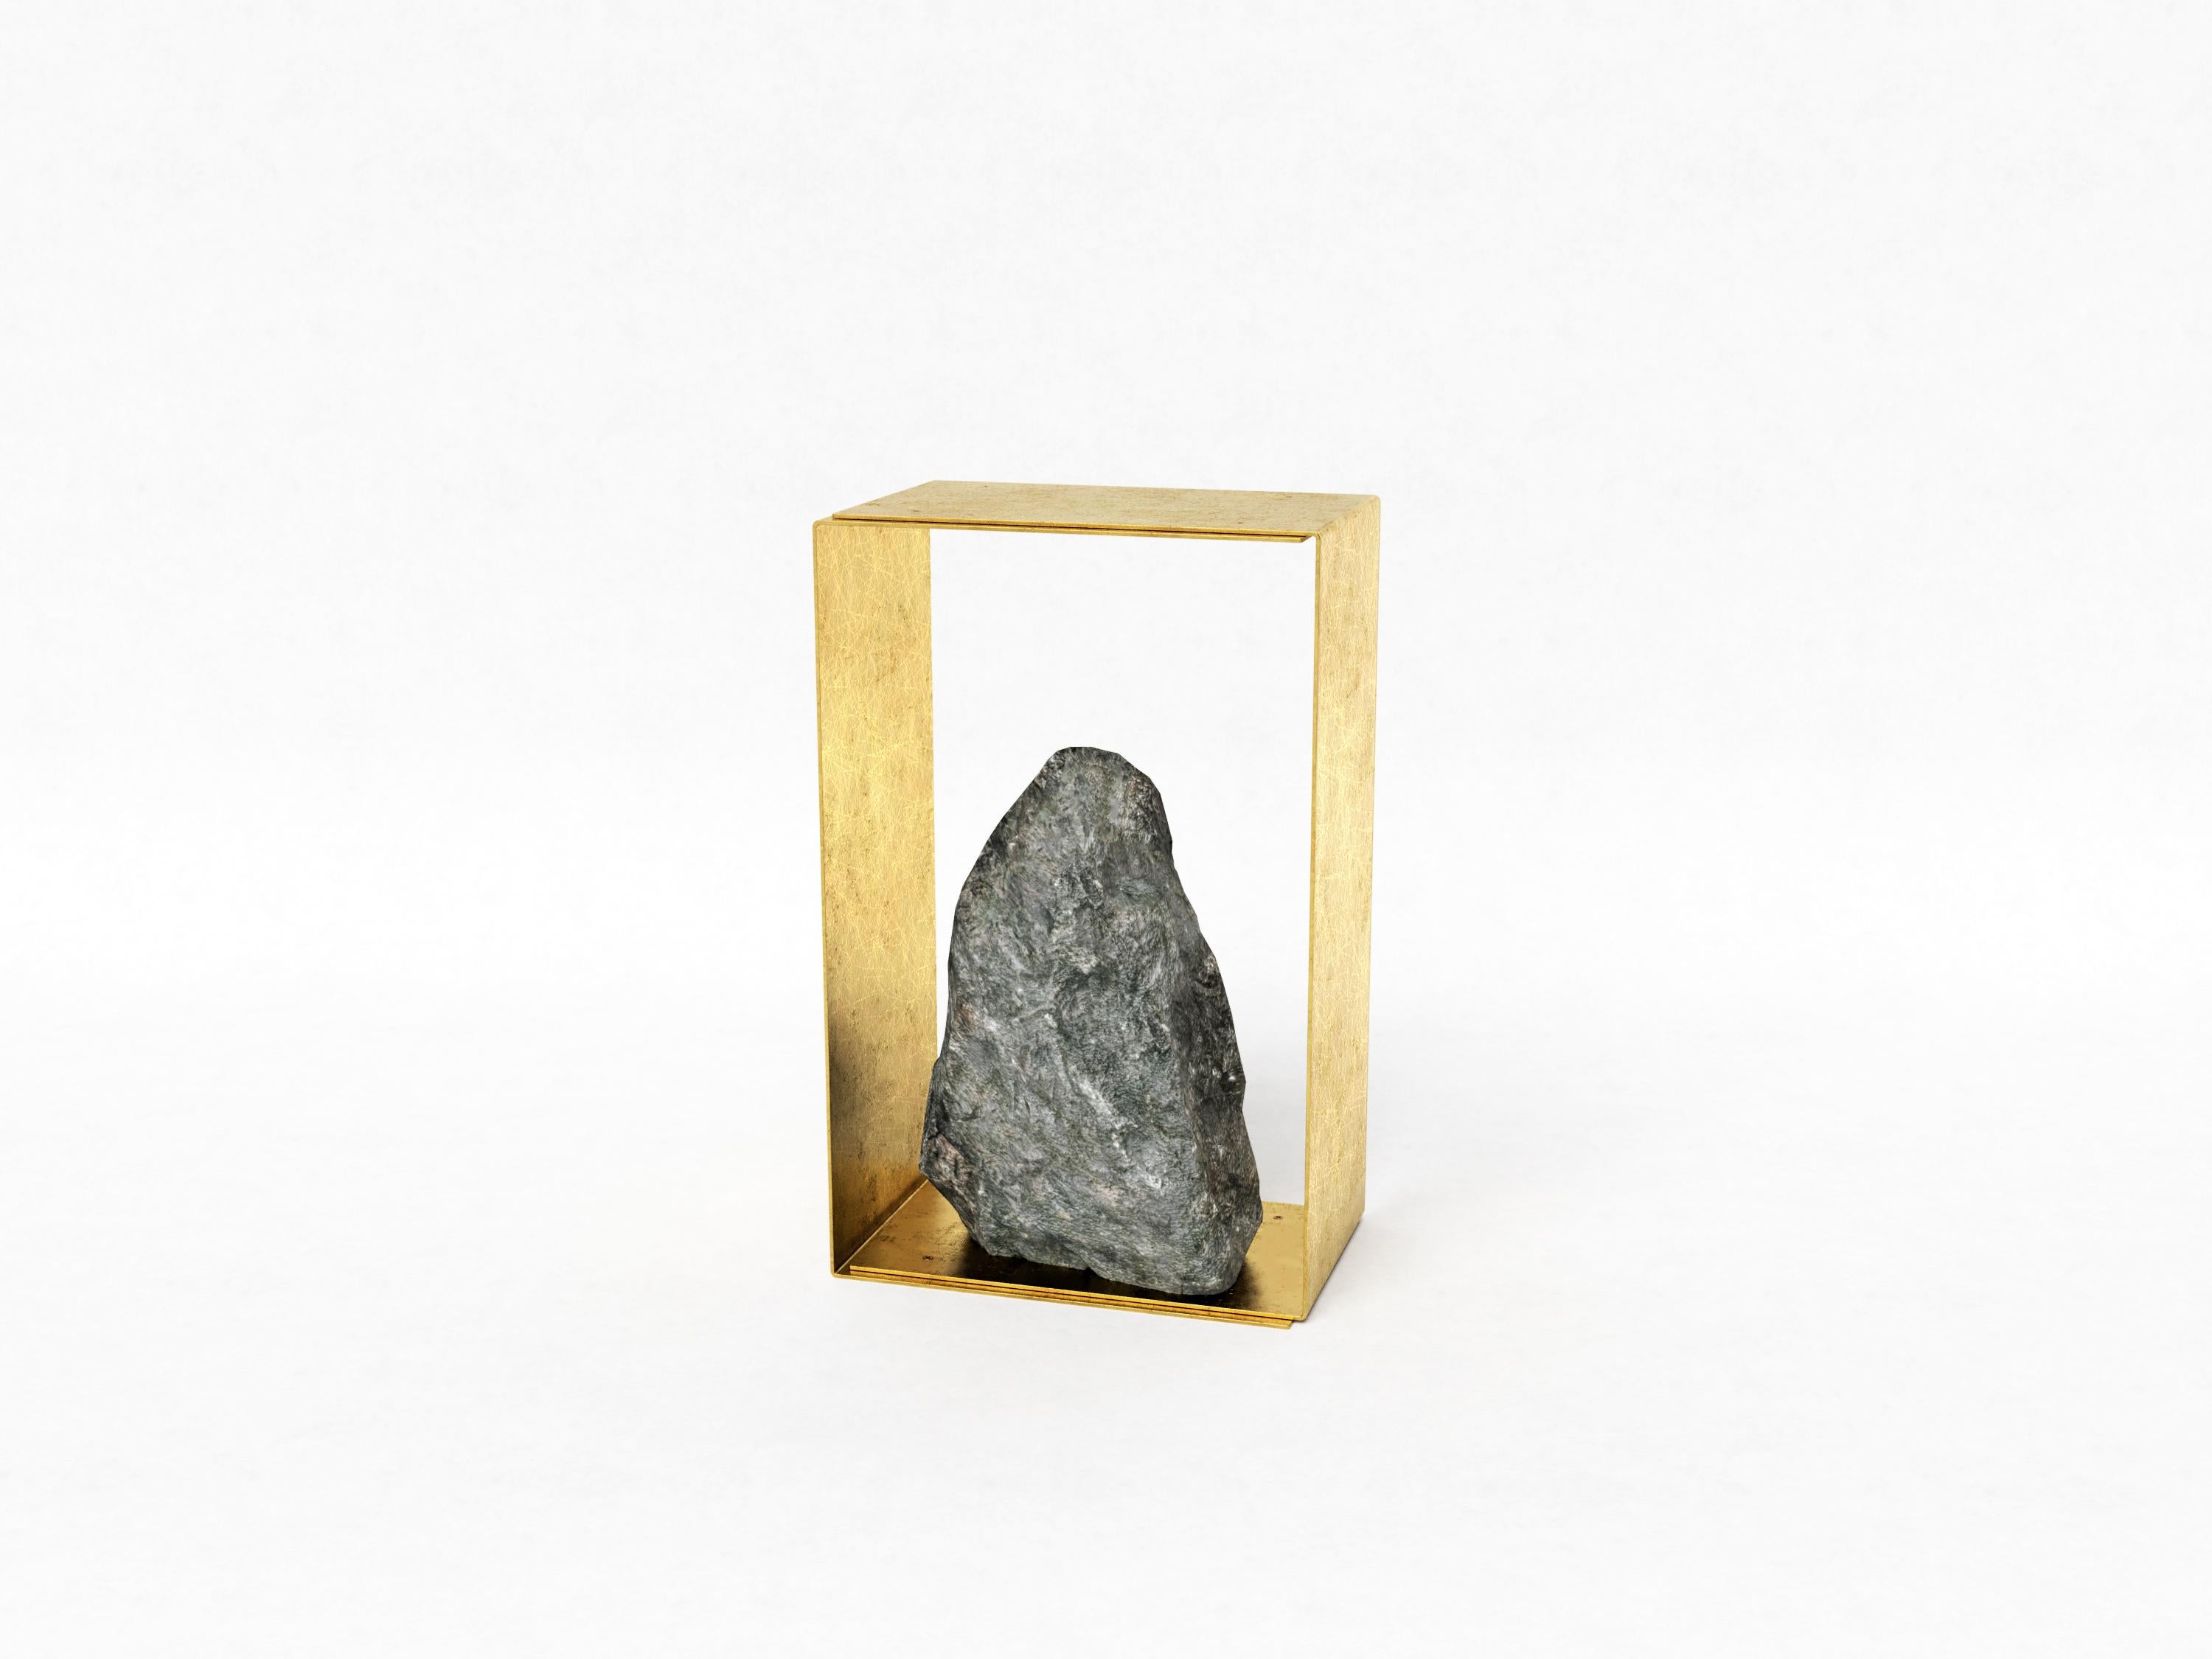 Hand brushed brass and granite side table by Batten and Kamp
Signed
Limited edition of 12 + 2 AP
Shelter to Ground collection
Dimensions: W 35 x D 23 x H 55 cm
Materials: Hand brushed brass and granite
Each unique

The stone is different with each